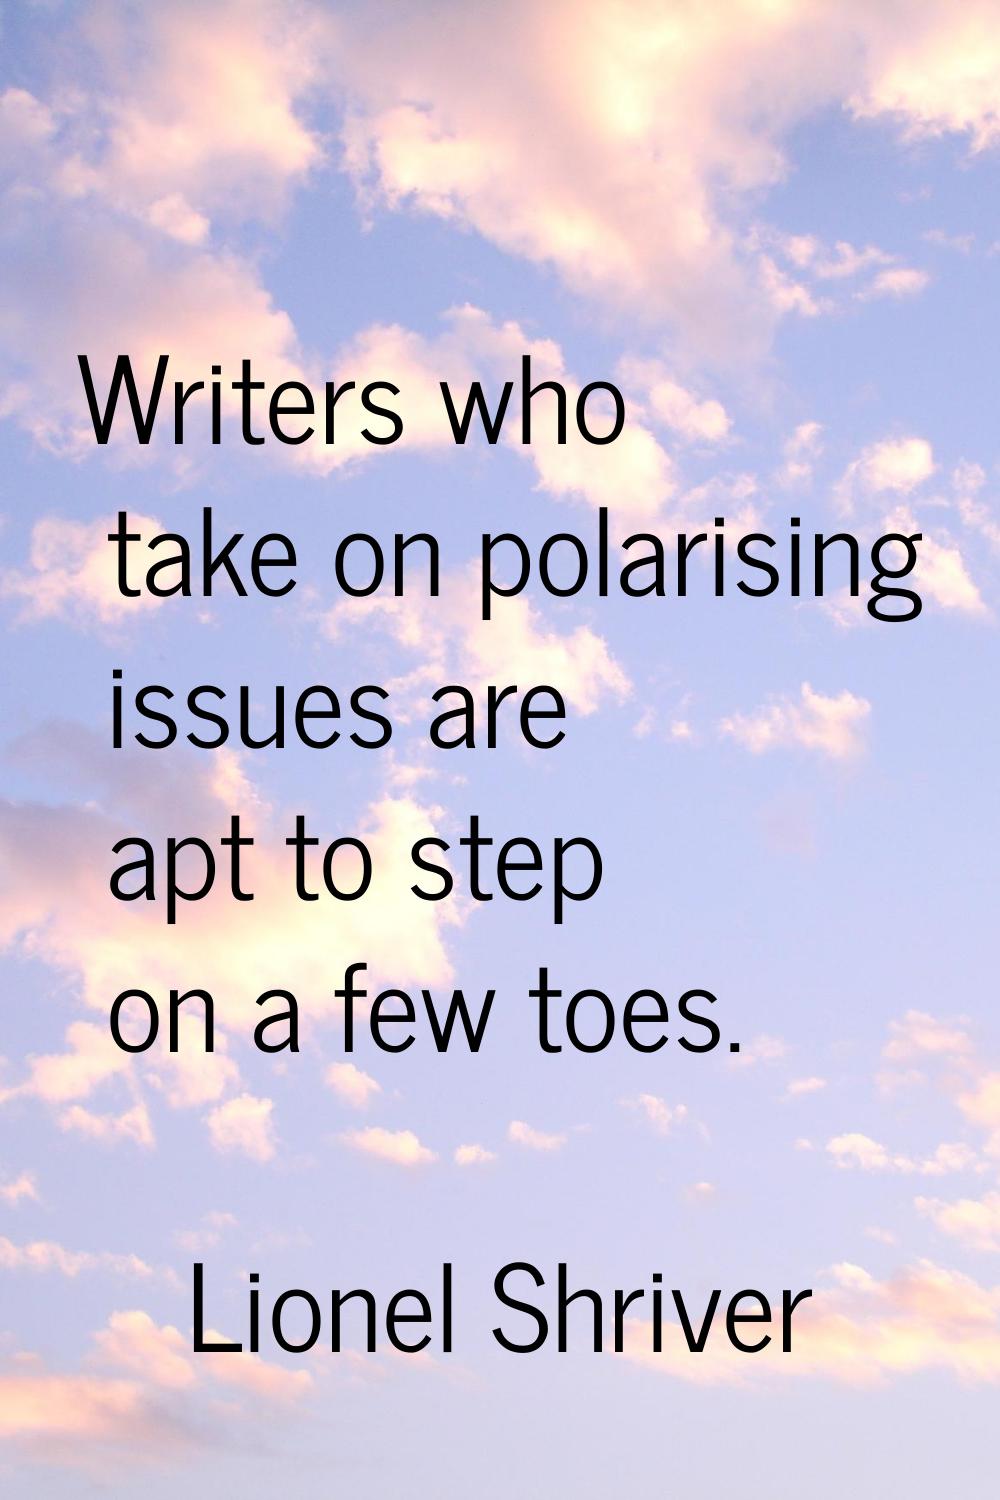 Writers who take on polarising issues are apt to step on a few toes.